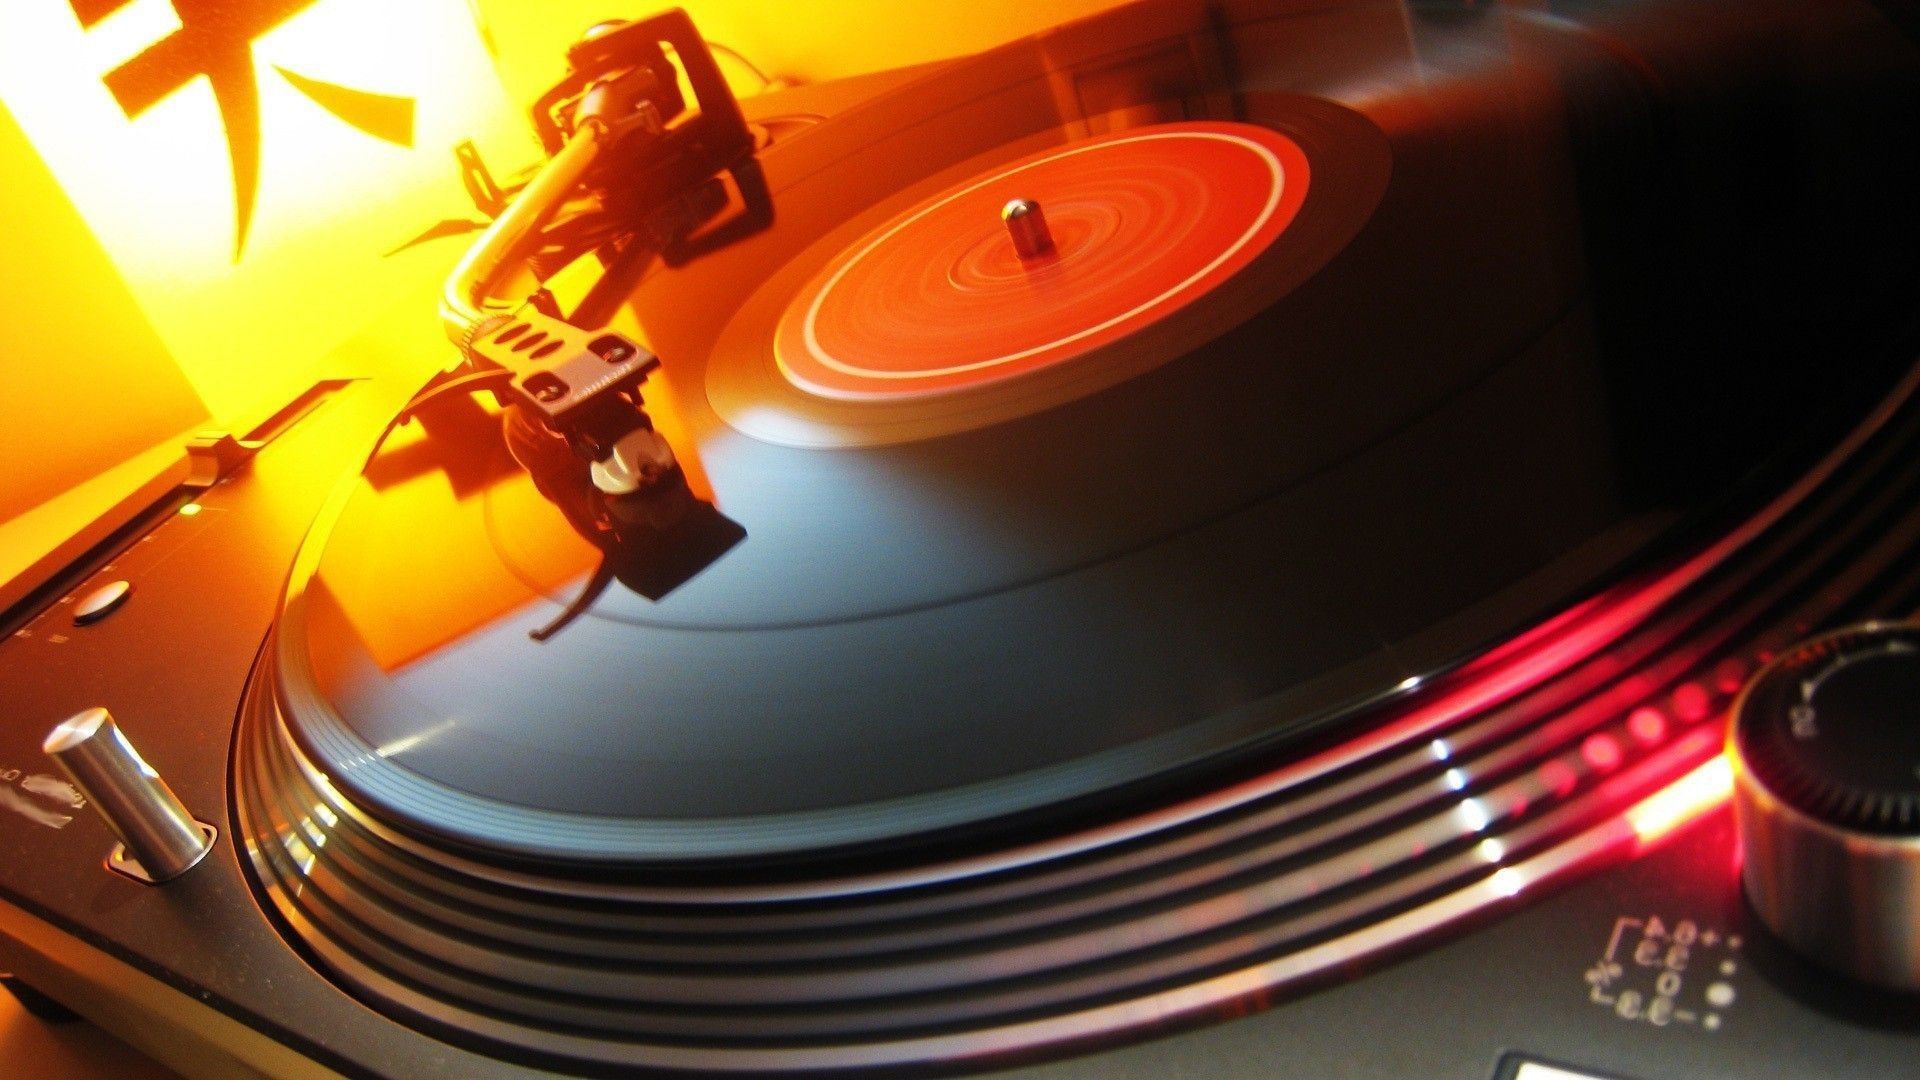 Turntable Wallpaper. Music streaming, Playlist, Dj sound effects